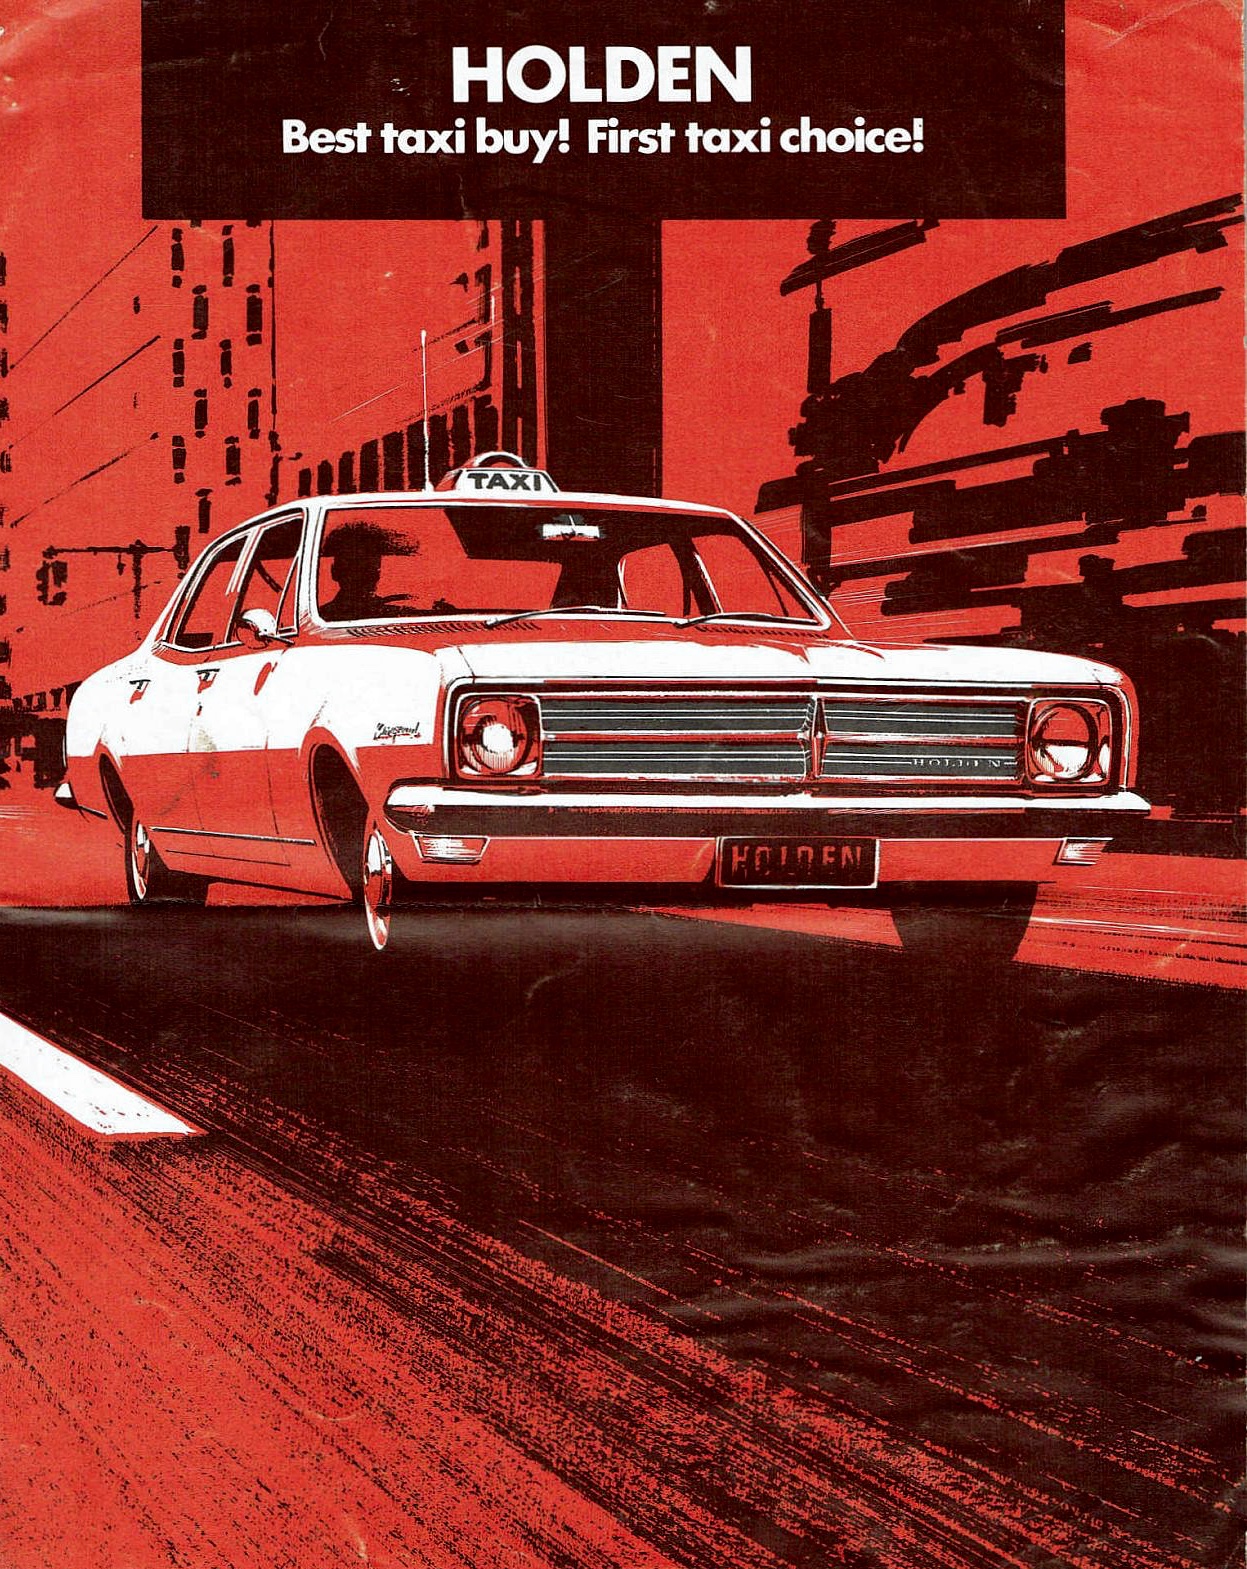 1968 Holden HK Taxi Brochure Page 3